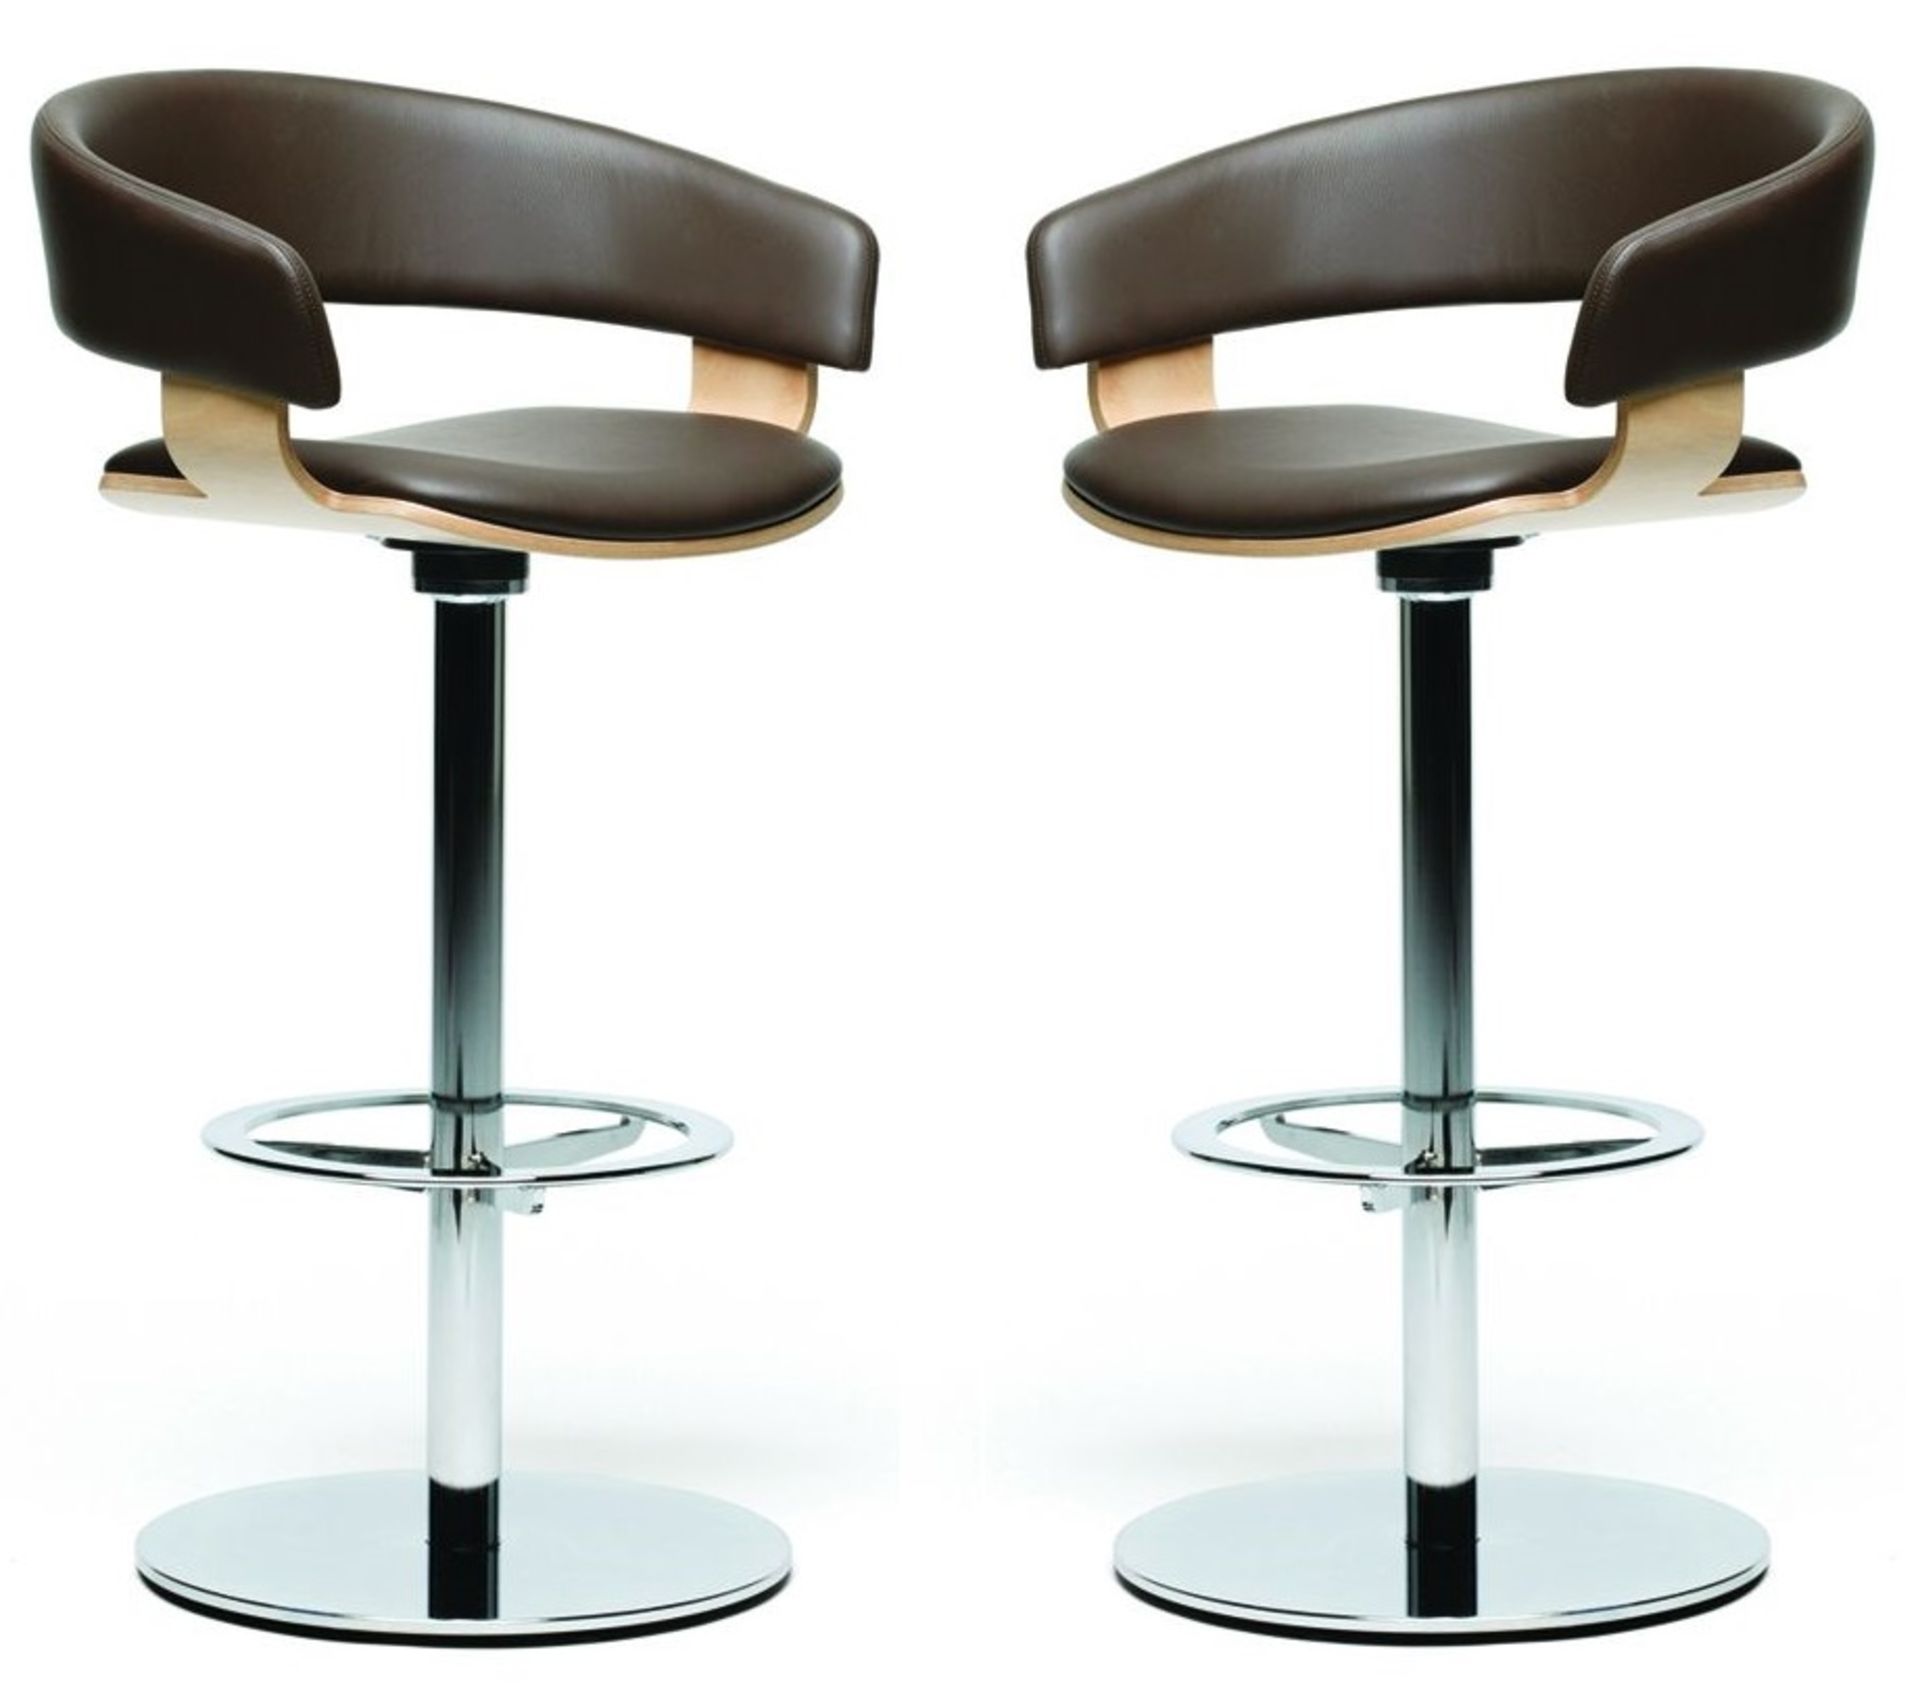 4 x Original Allermuir 'Mollie' Designer Swivel Bar Stools - Features Brown Leather Upholstery, Wood